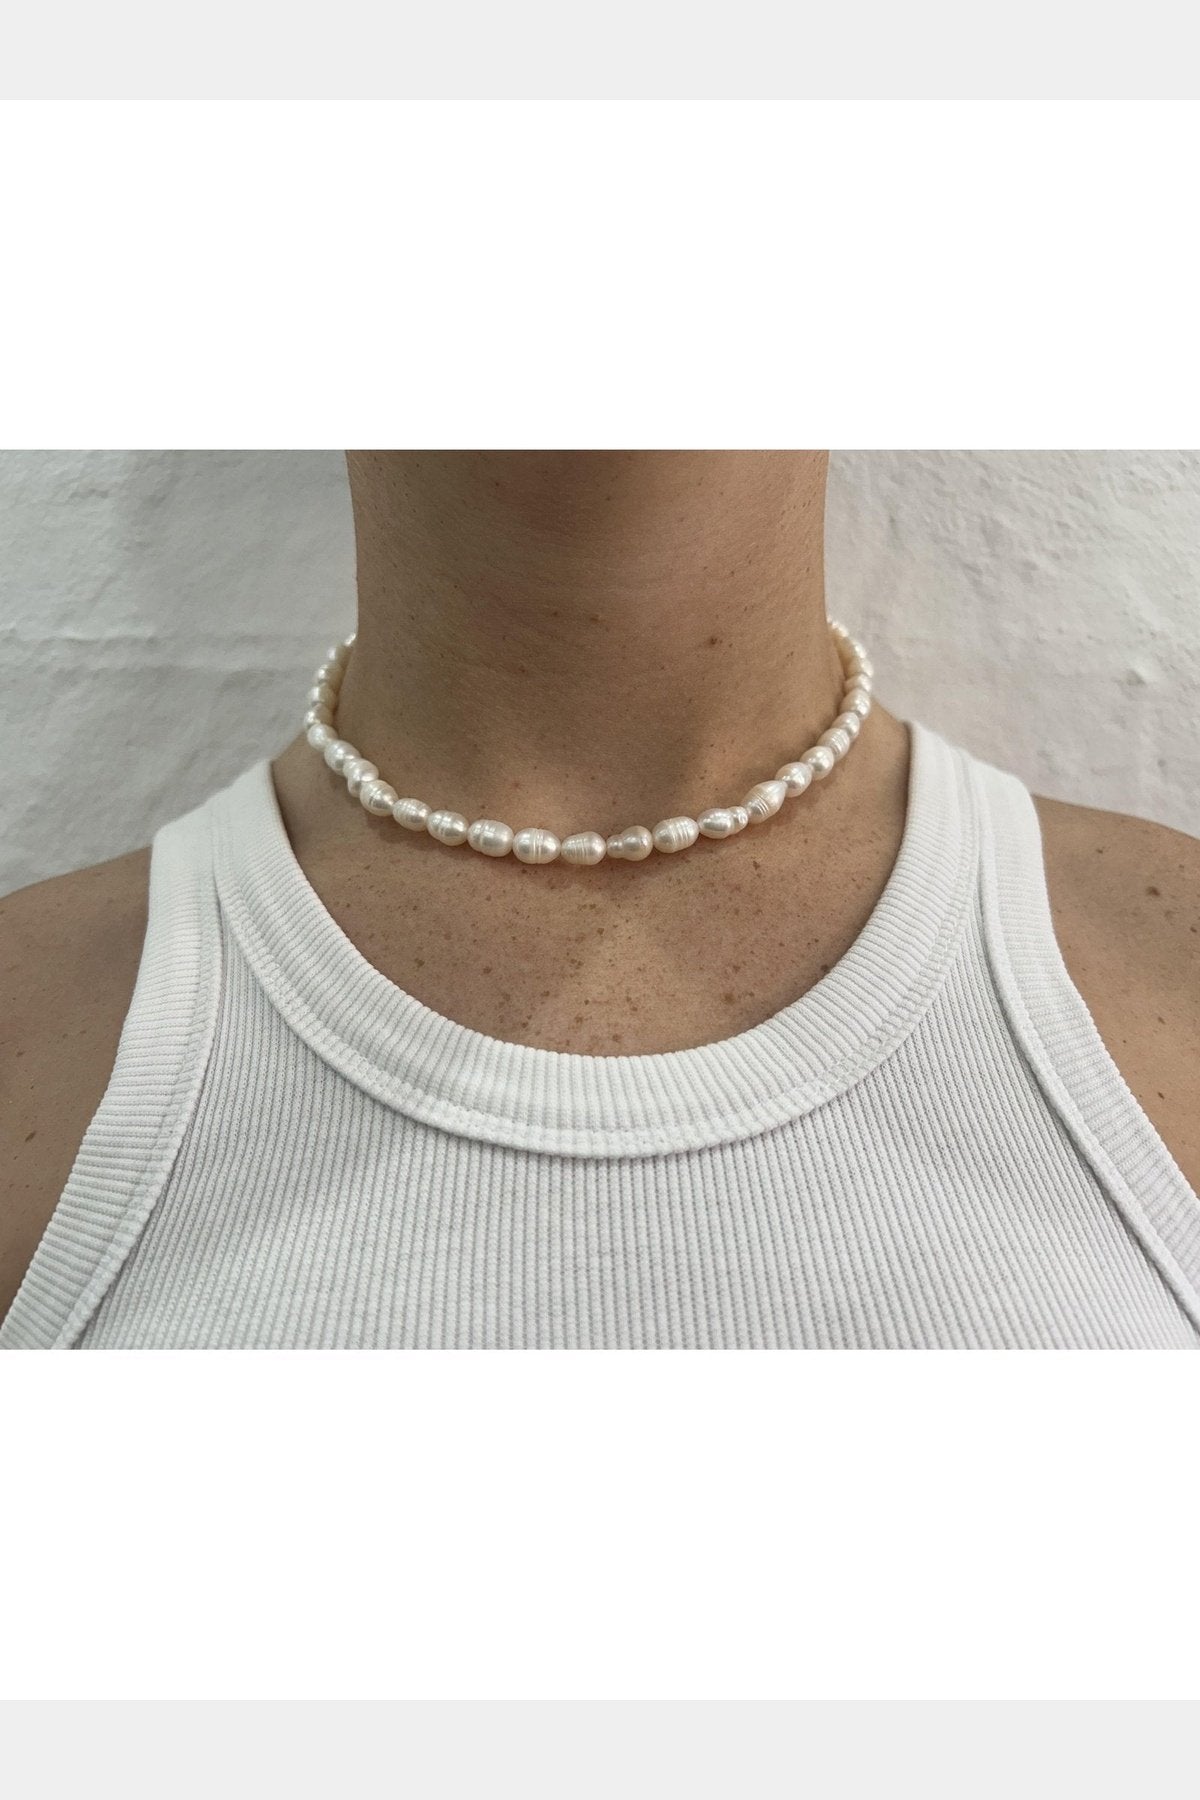 Somewhere necklace - pearl